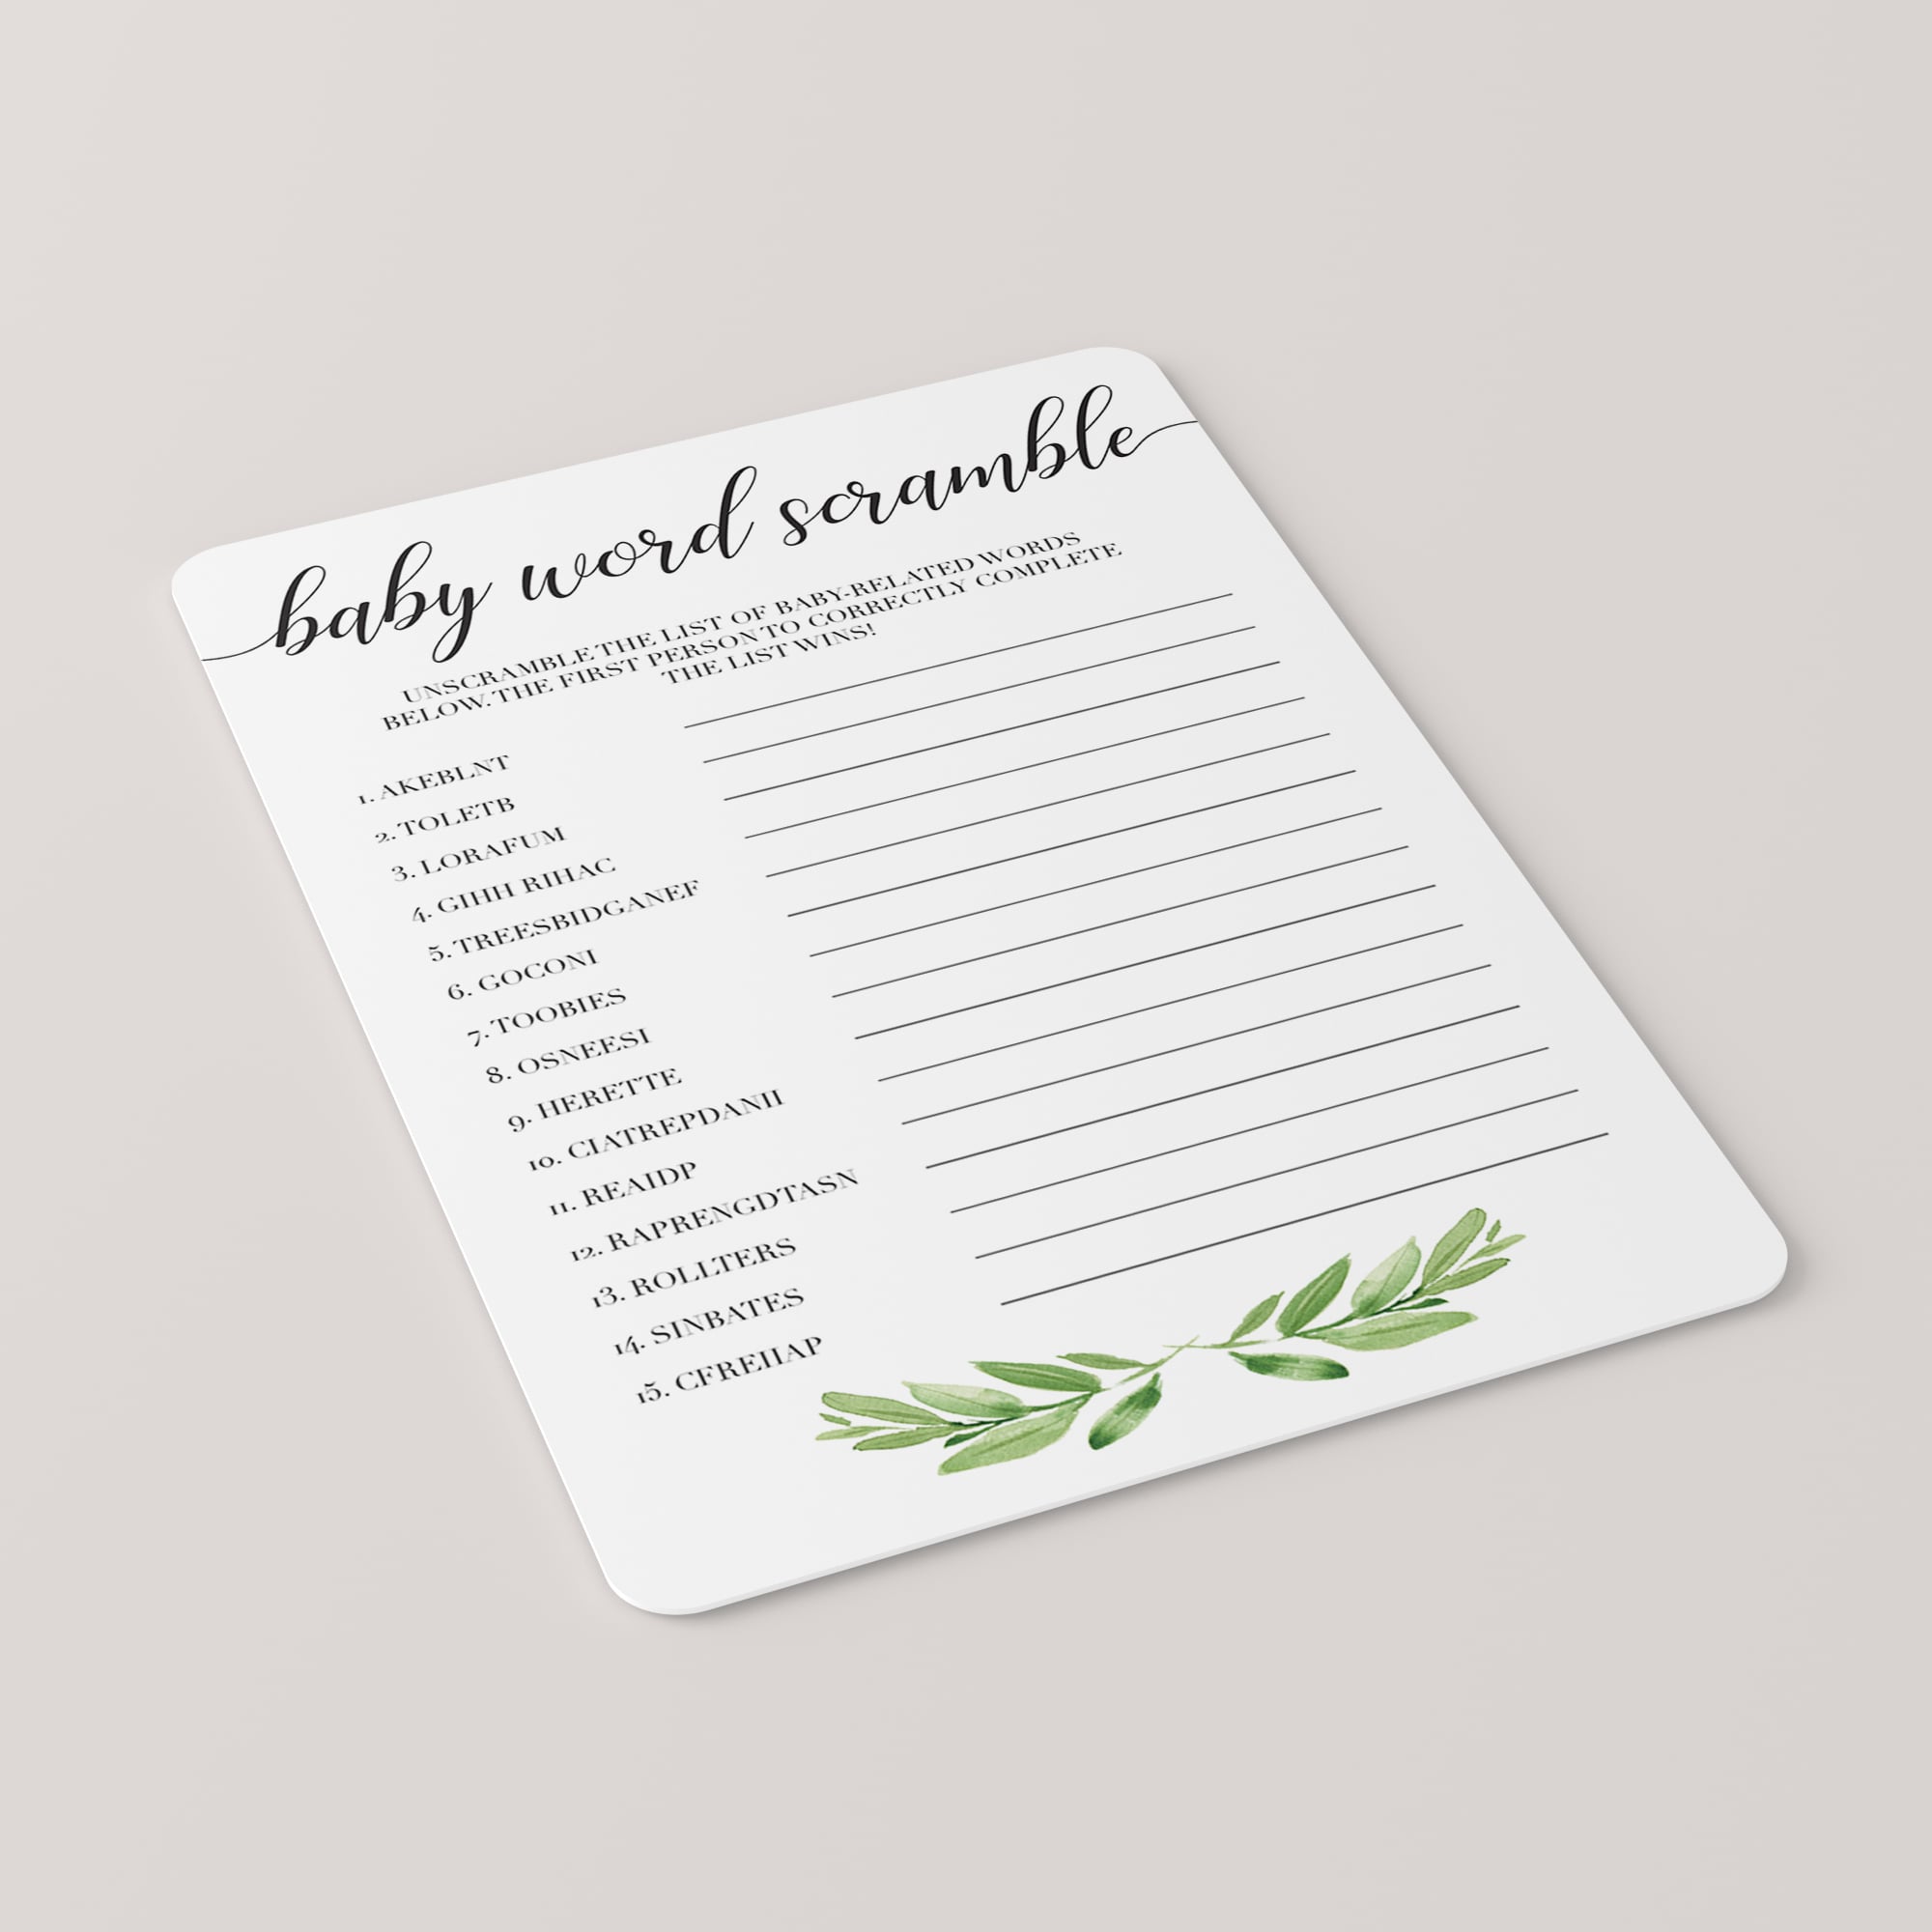 Scrambled word baby shower game download by LittleSizzle